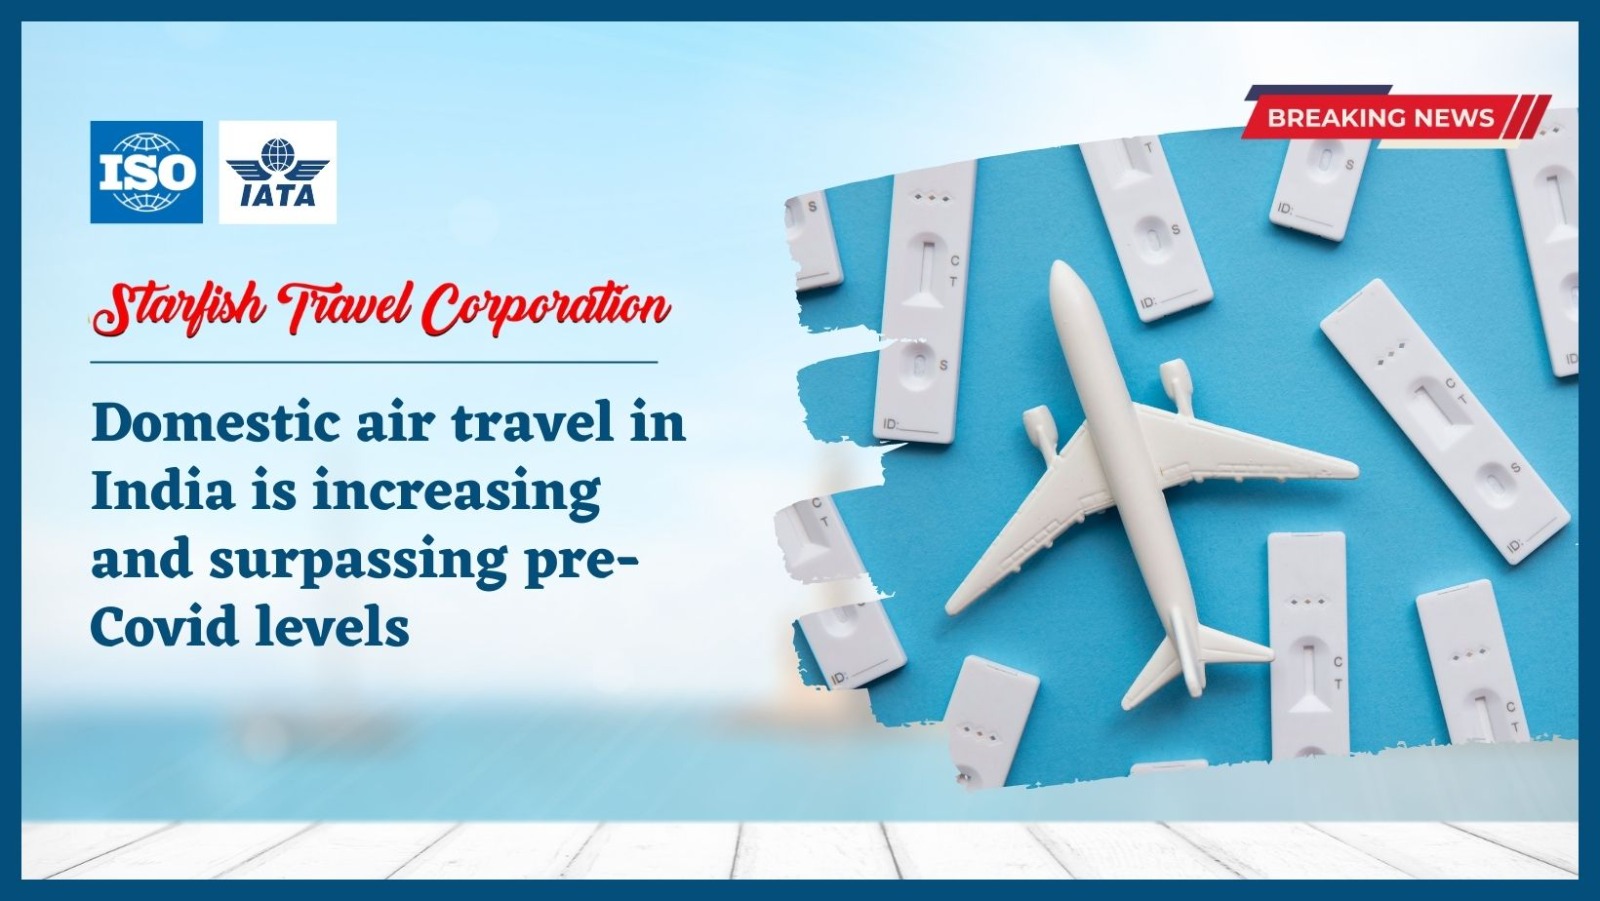 Domestic air travel in India is increasing and surpassing pre-Covid levels.